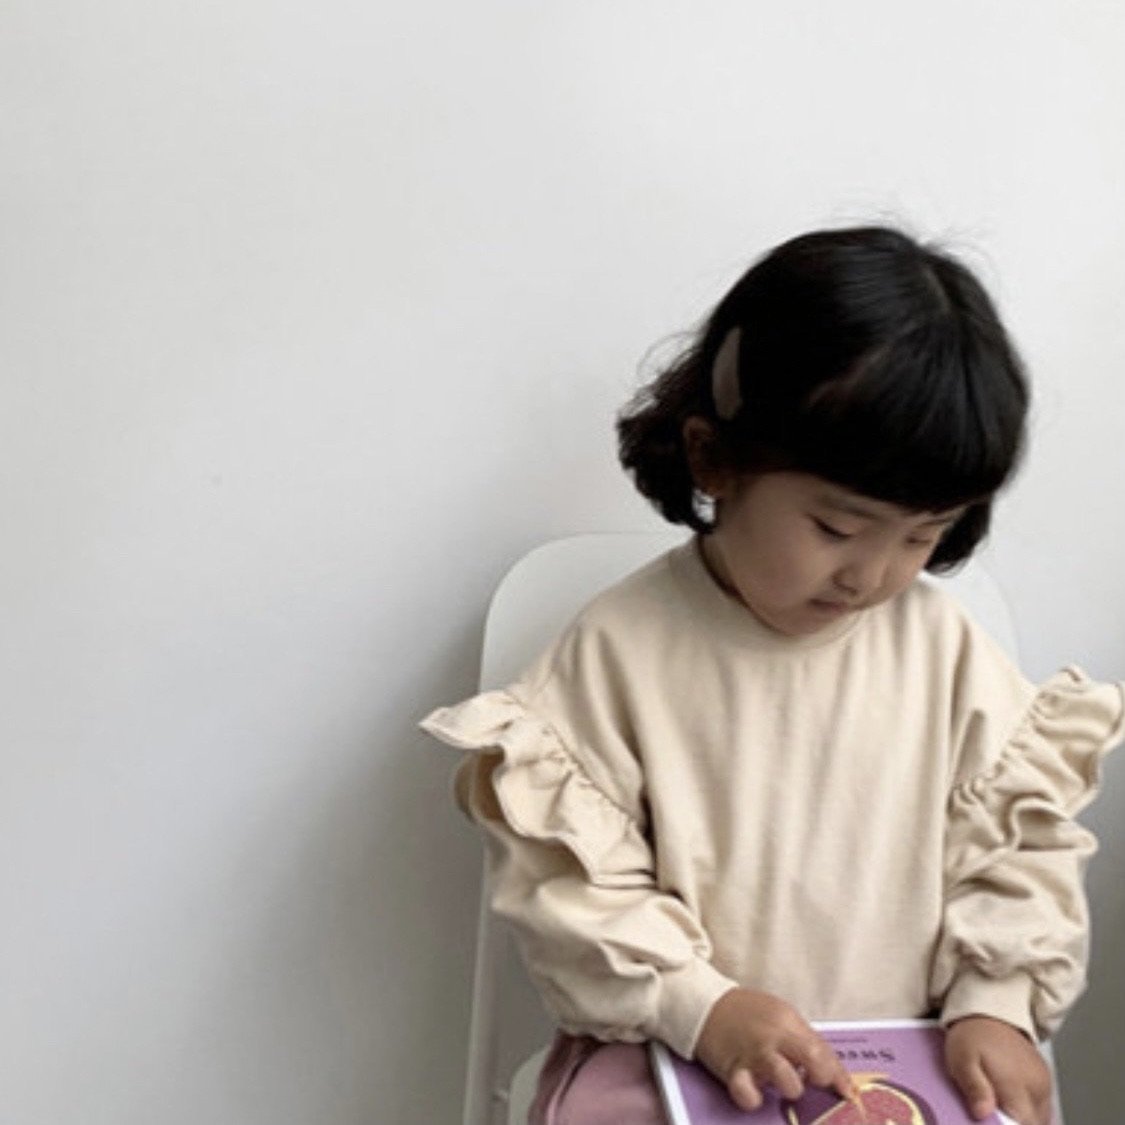 Frill Sweater find Stylish Fashion for Little People- at Little Foxx Concept Store